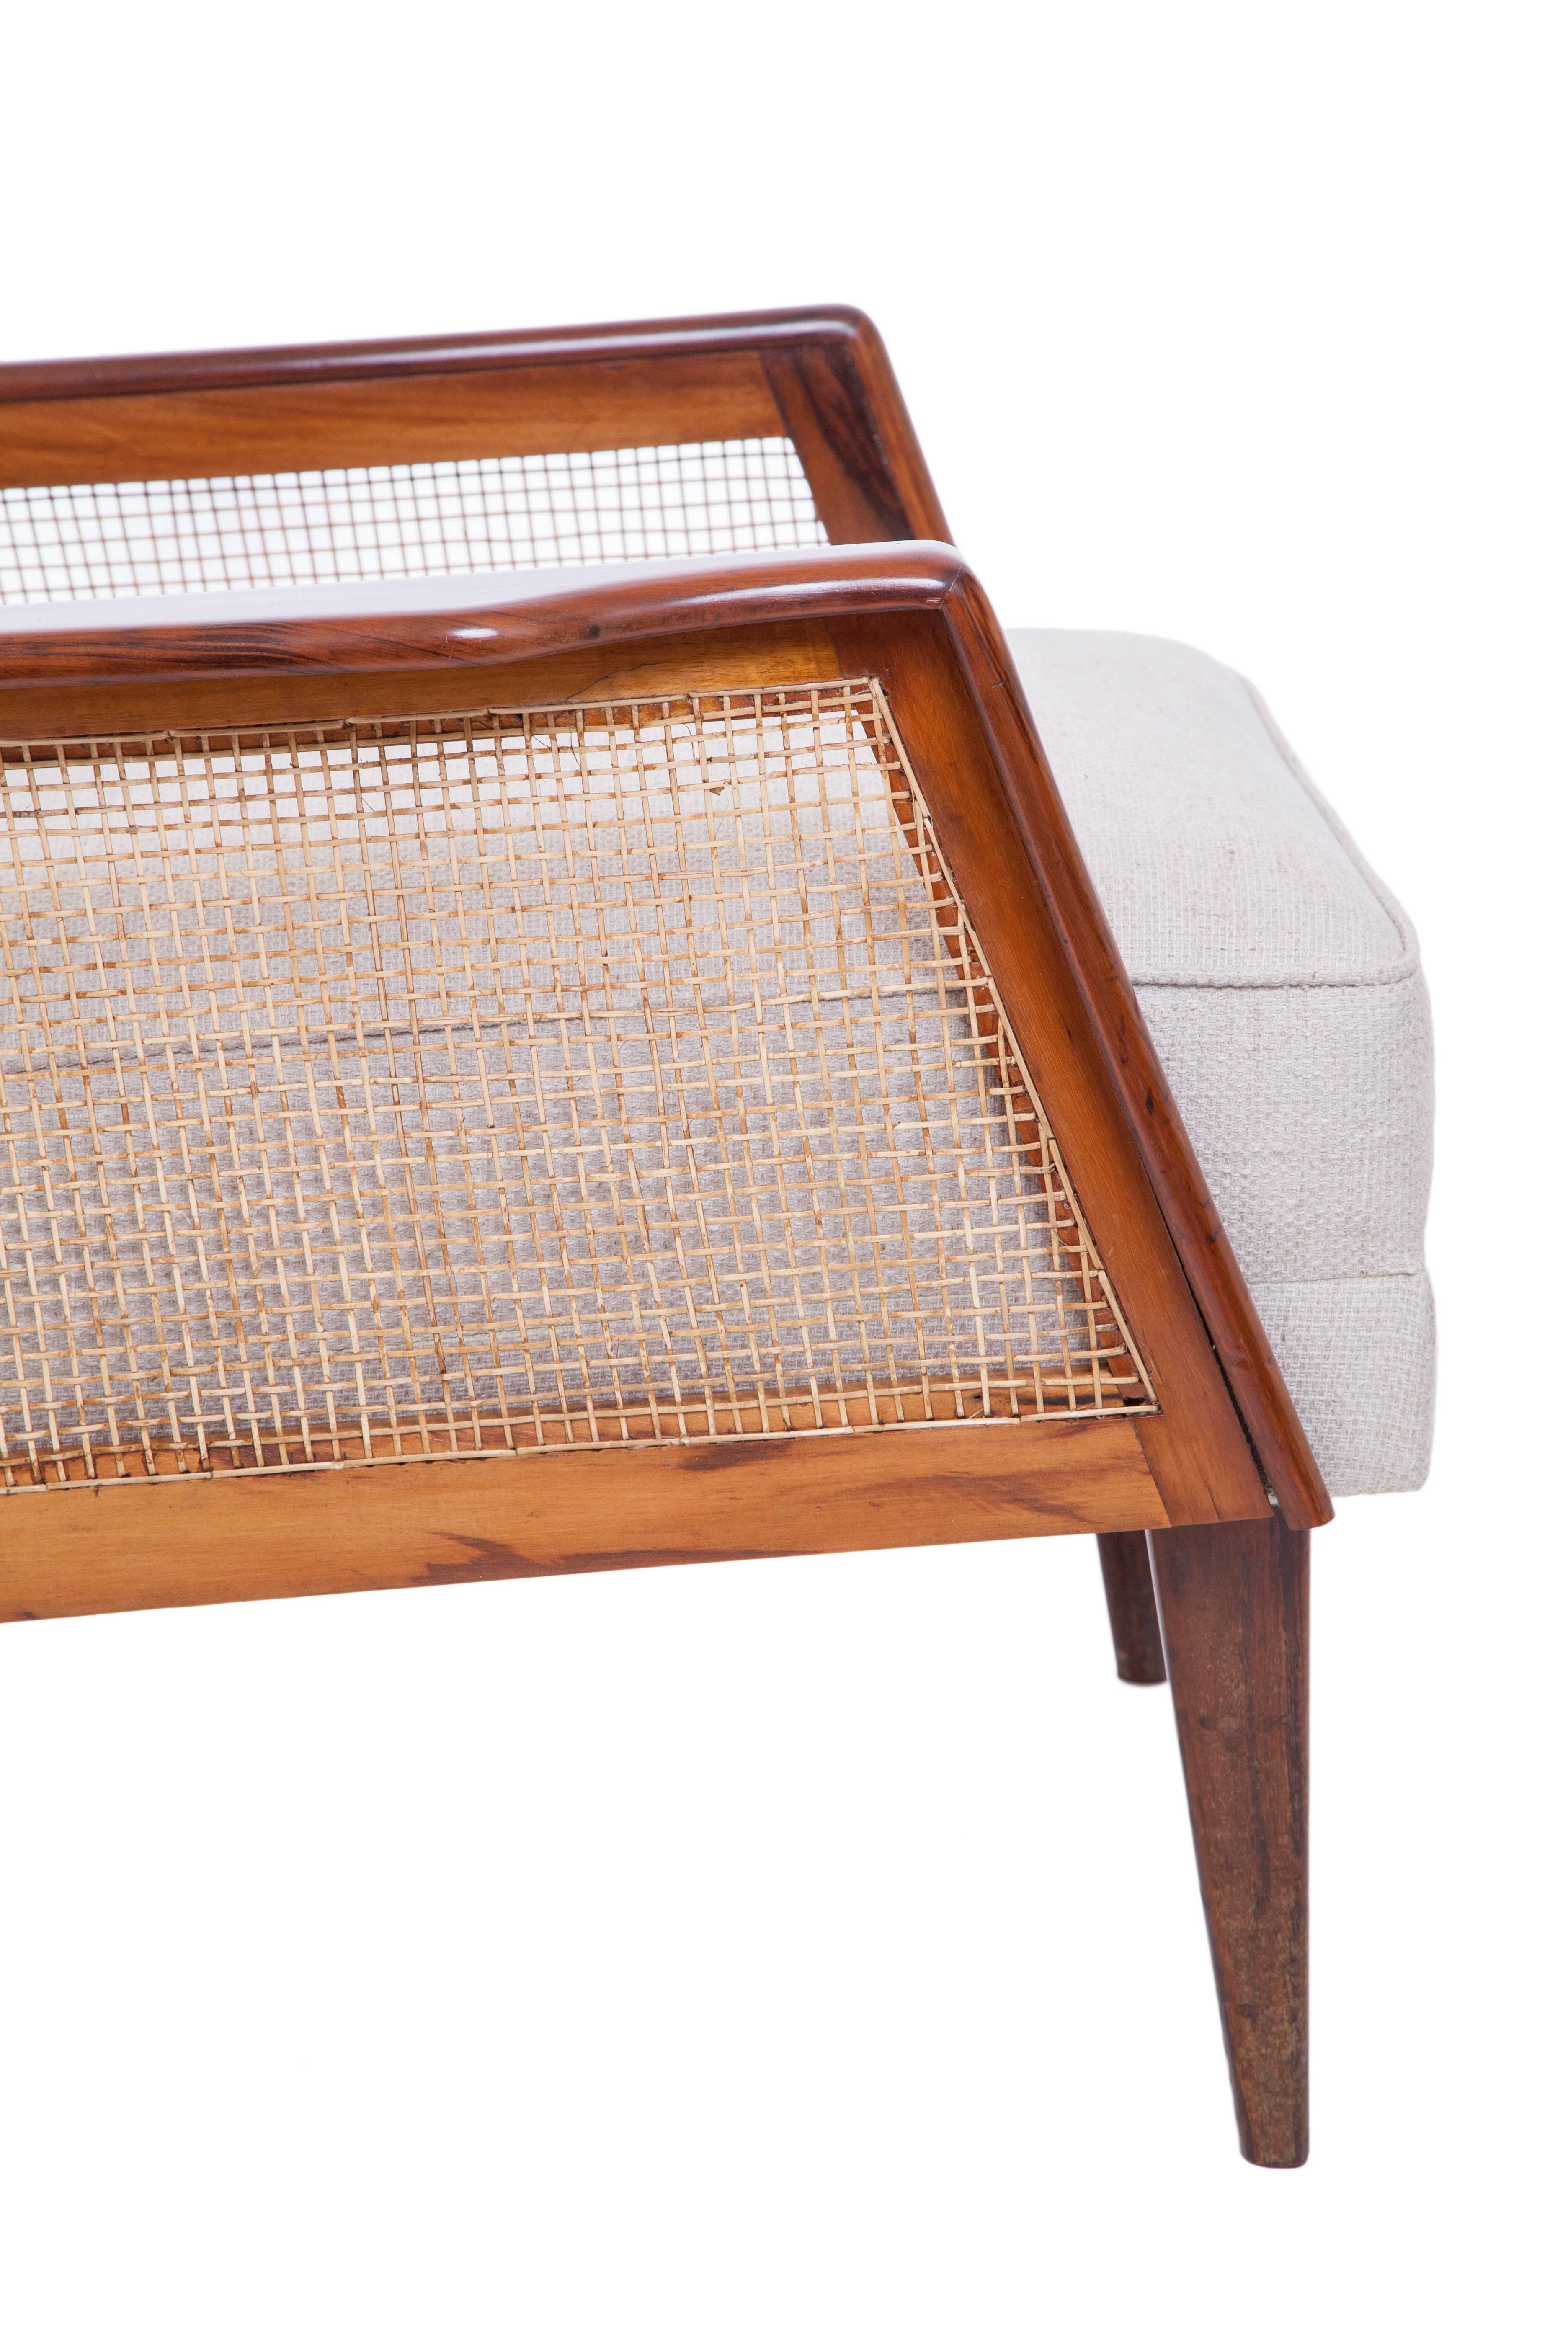 Woven Midcentury Brazilian Caviuna Armchair Upholstered in Linen with Caned Sides